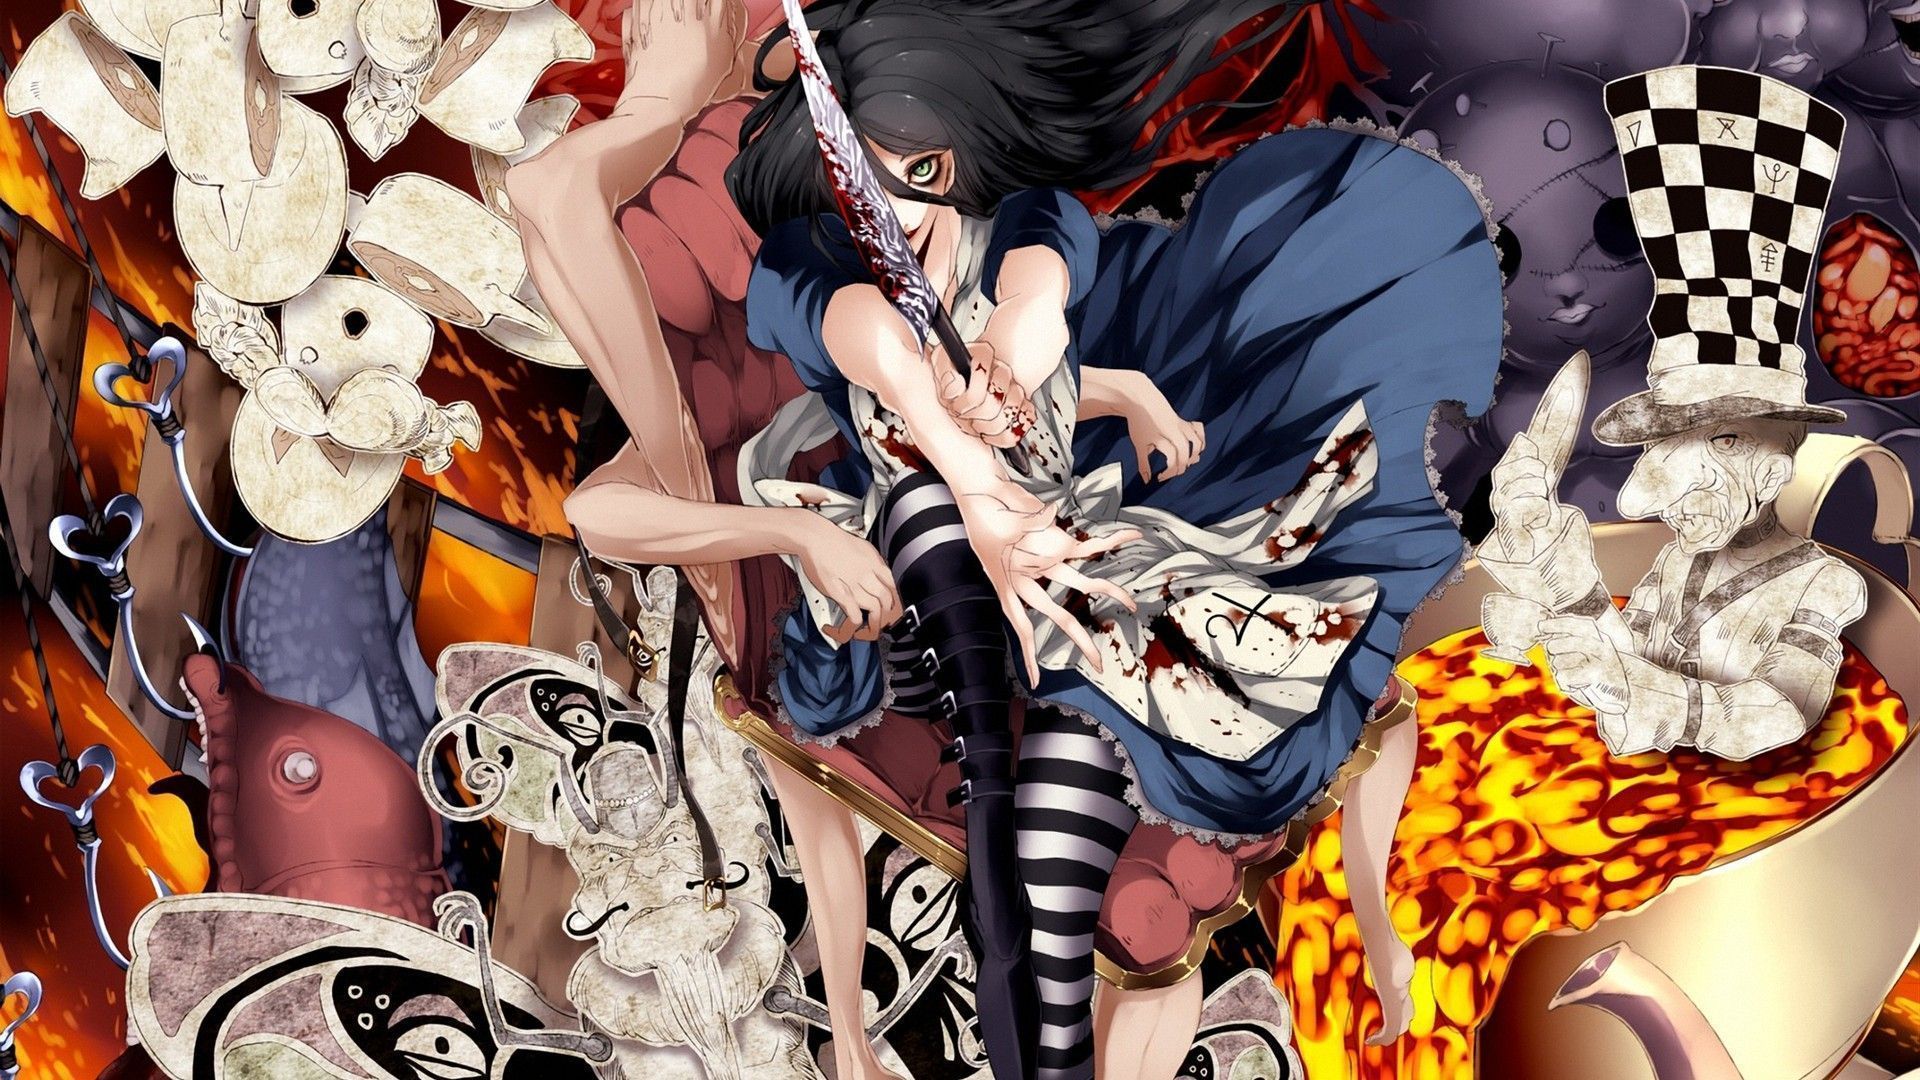 Top Alice Madness Returns 25852811 Images for Pinterest